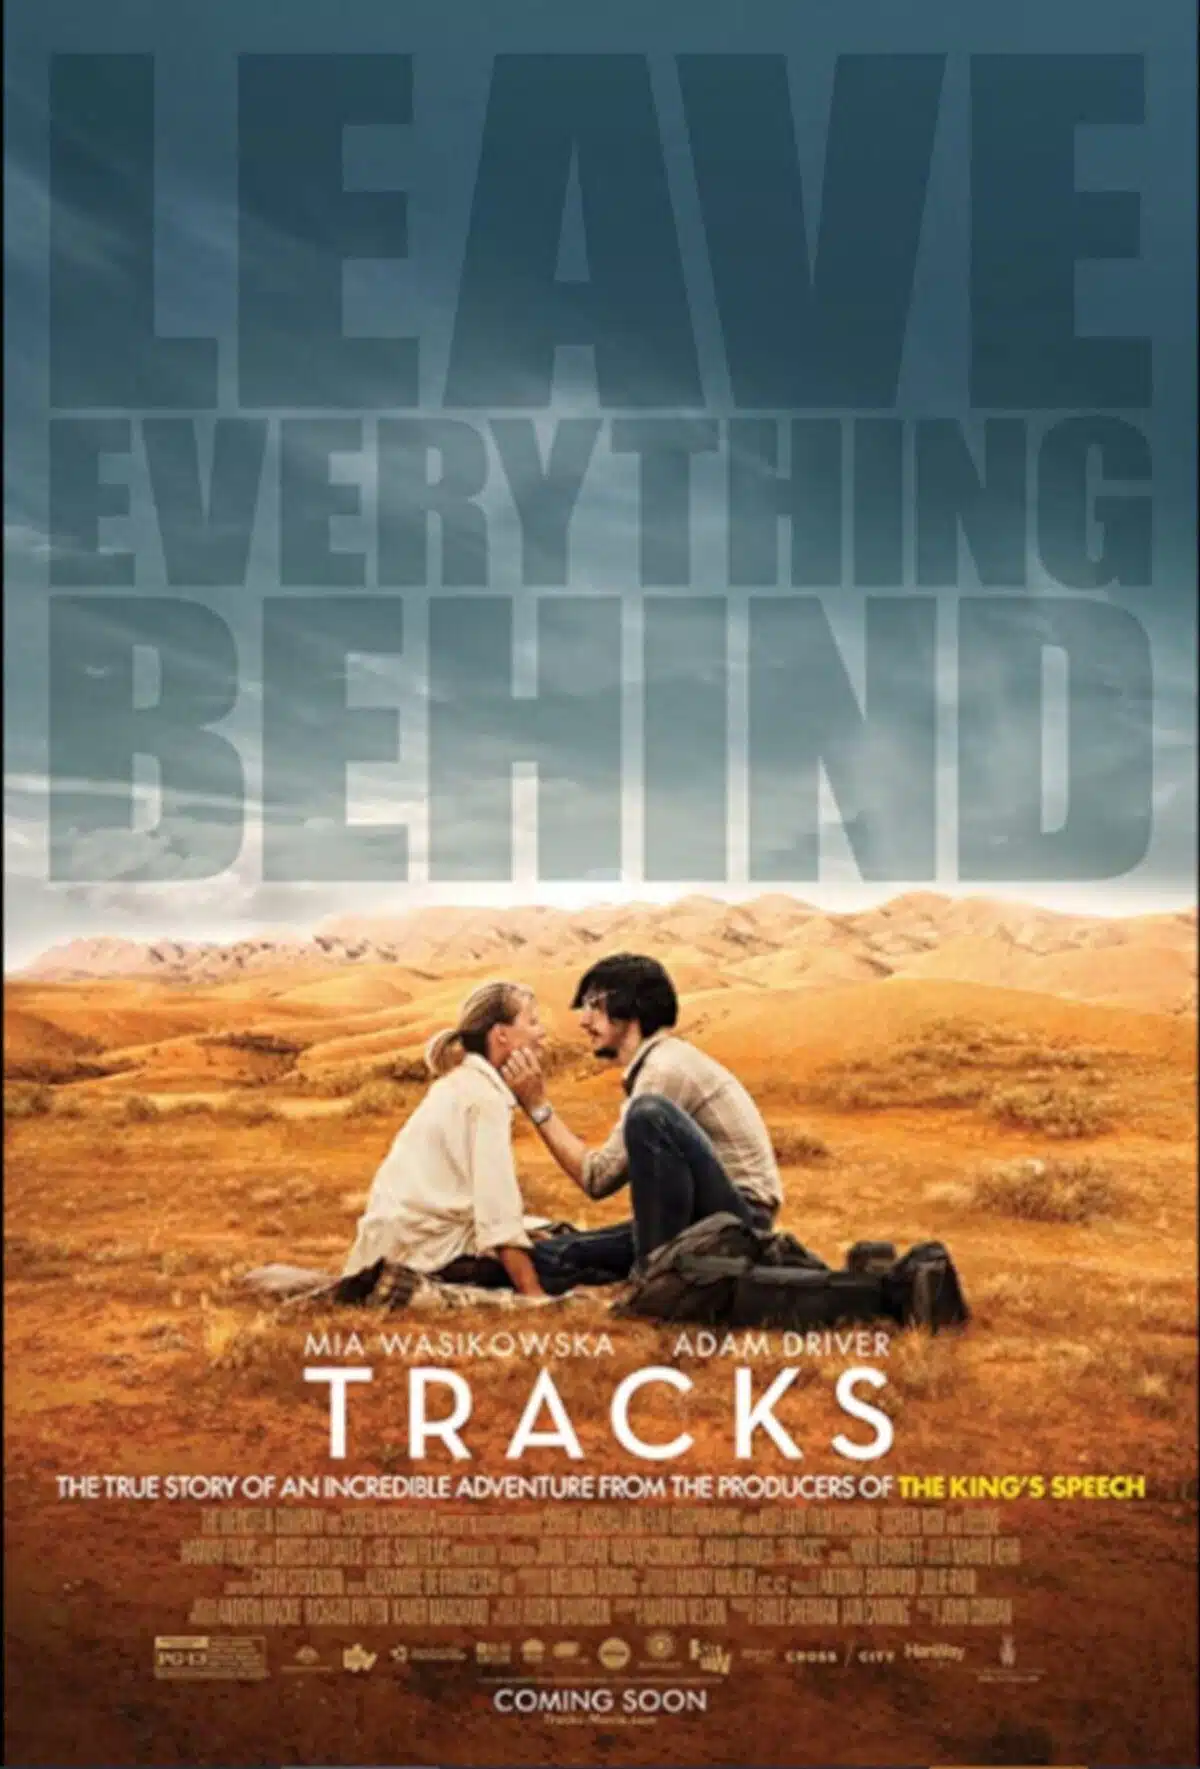 Tracks is an unforgettable trail movie that’s based on an unbelievable true story!